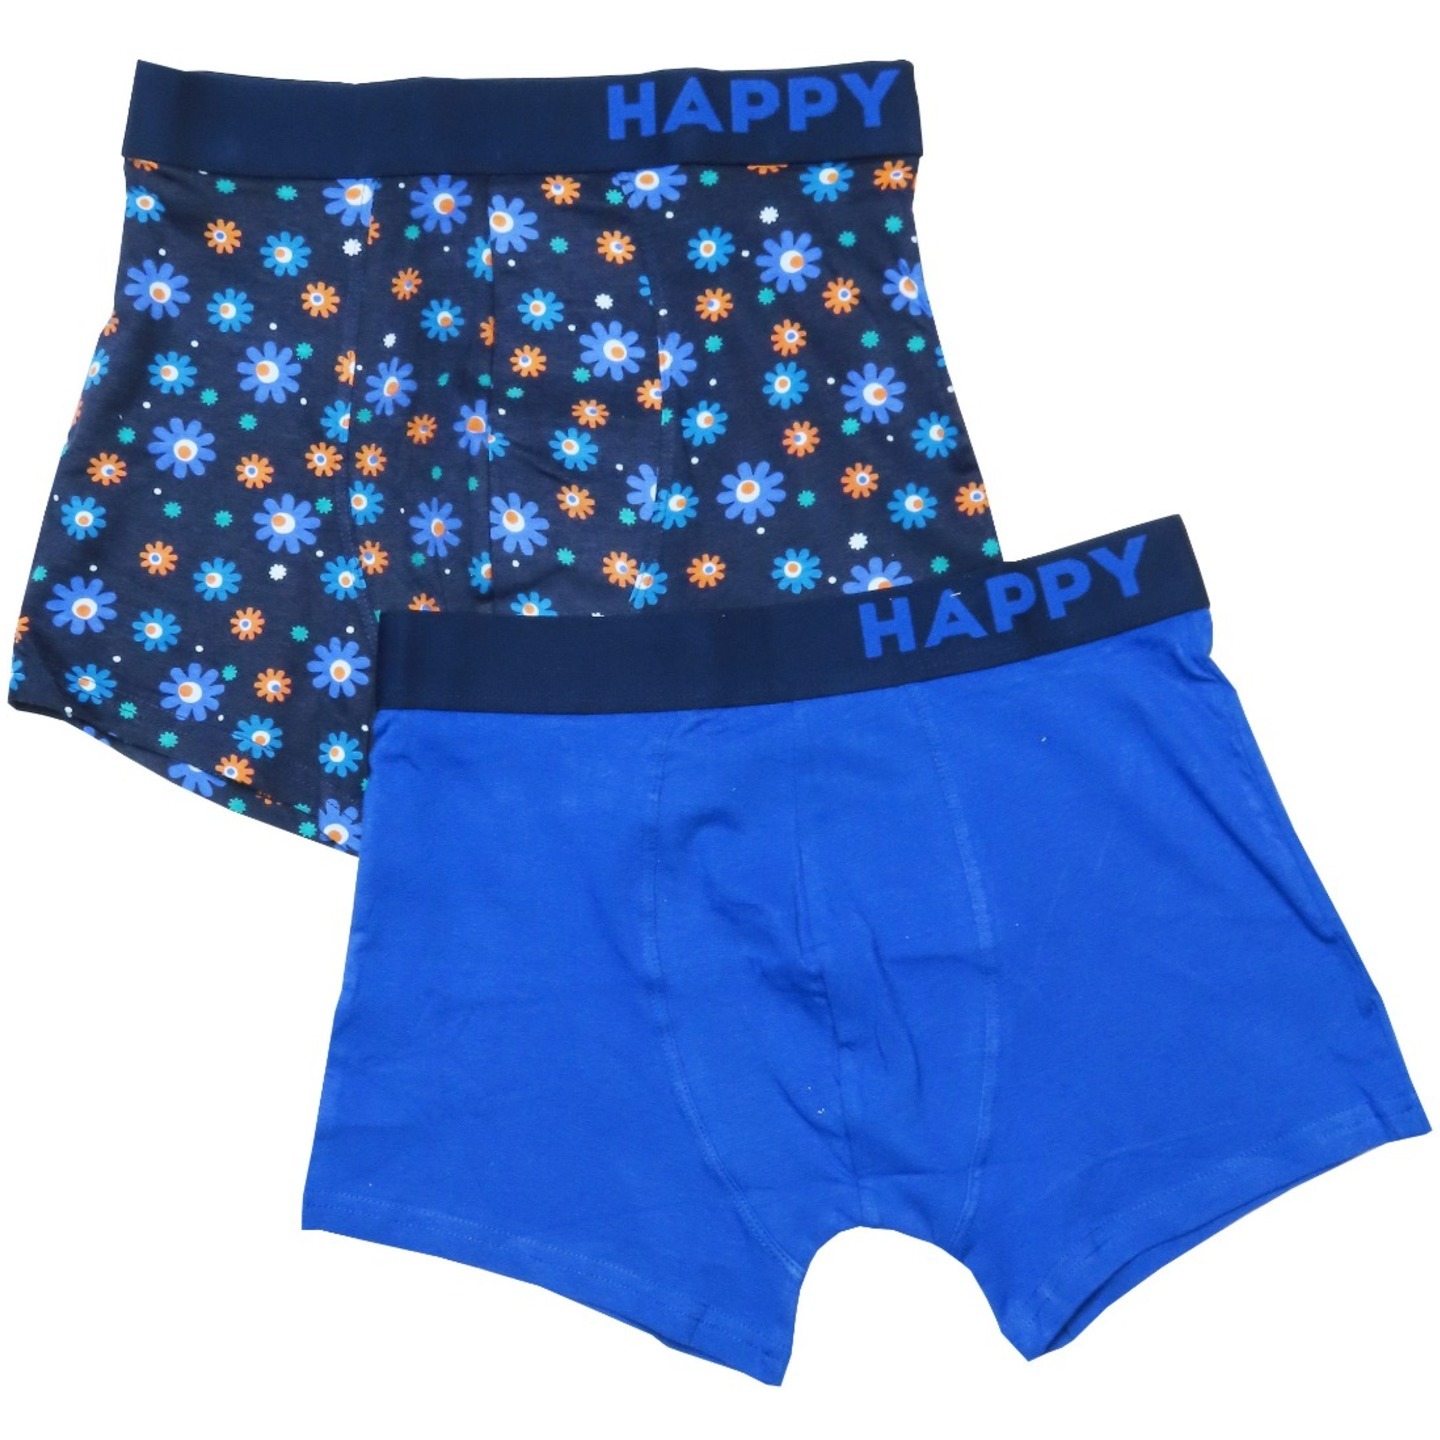 MENS TWIN PACK BOXERS